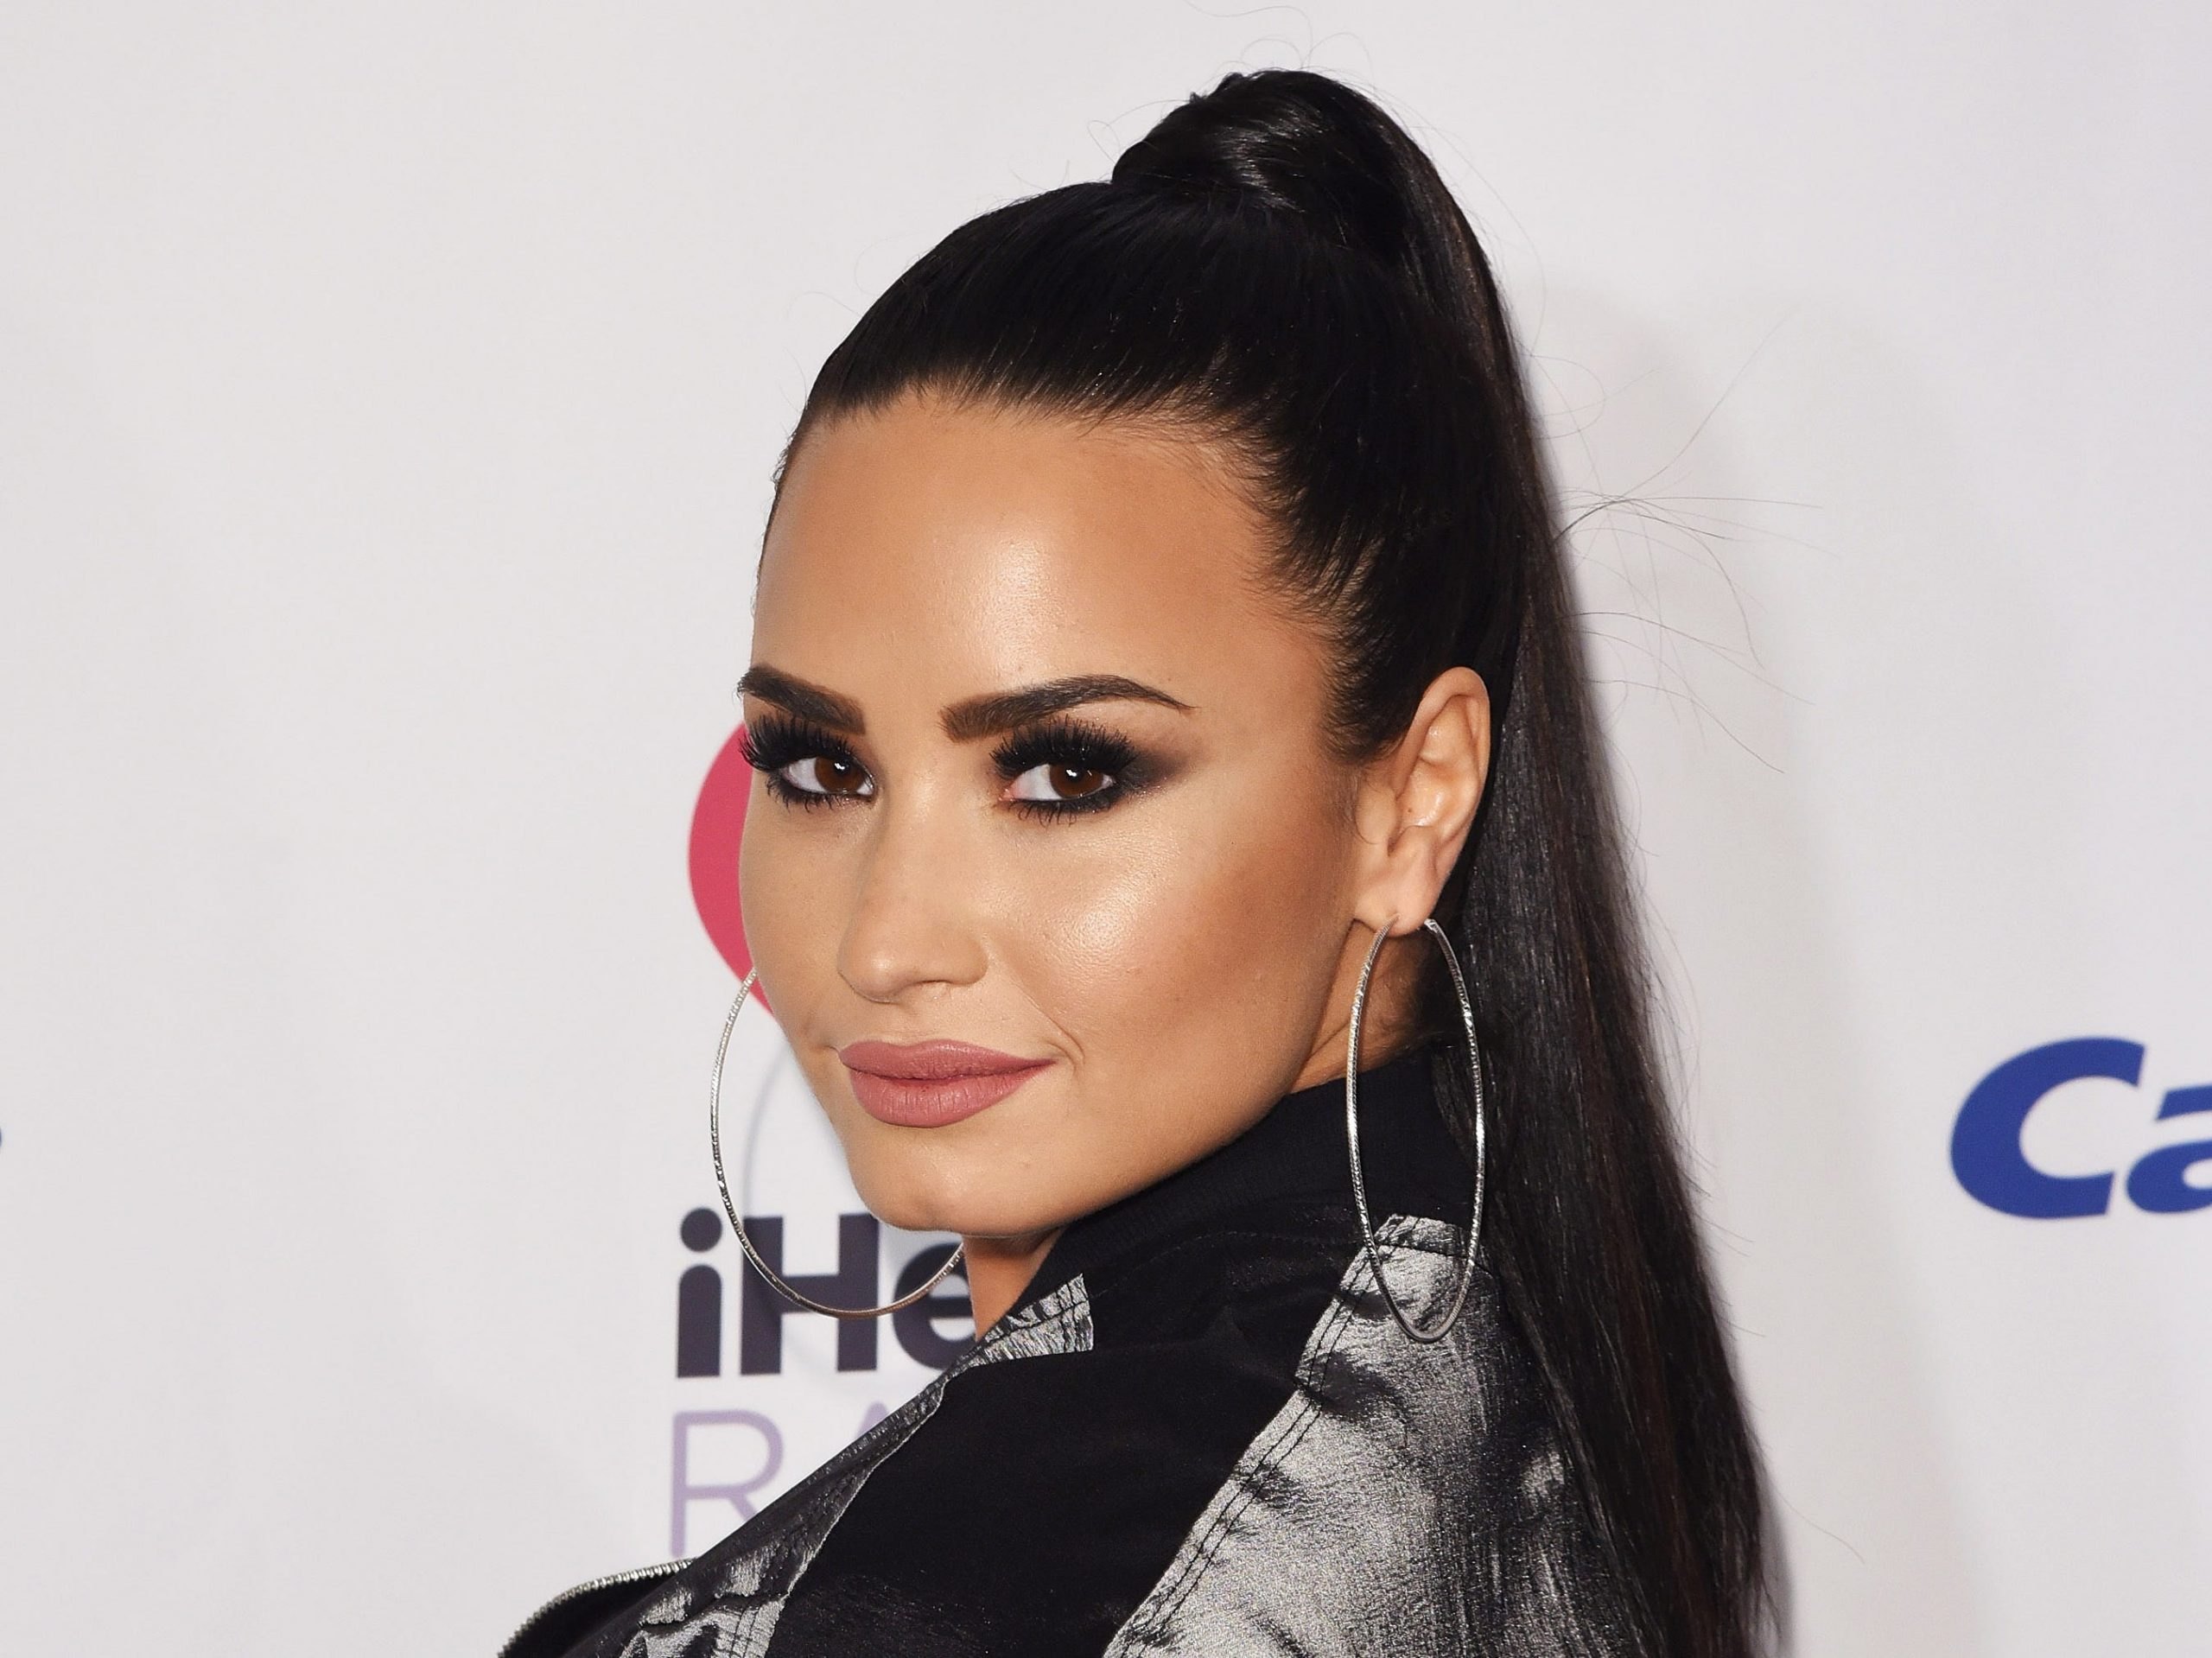 Demi Lovato has been public about her eating issues for years.